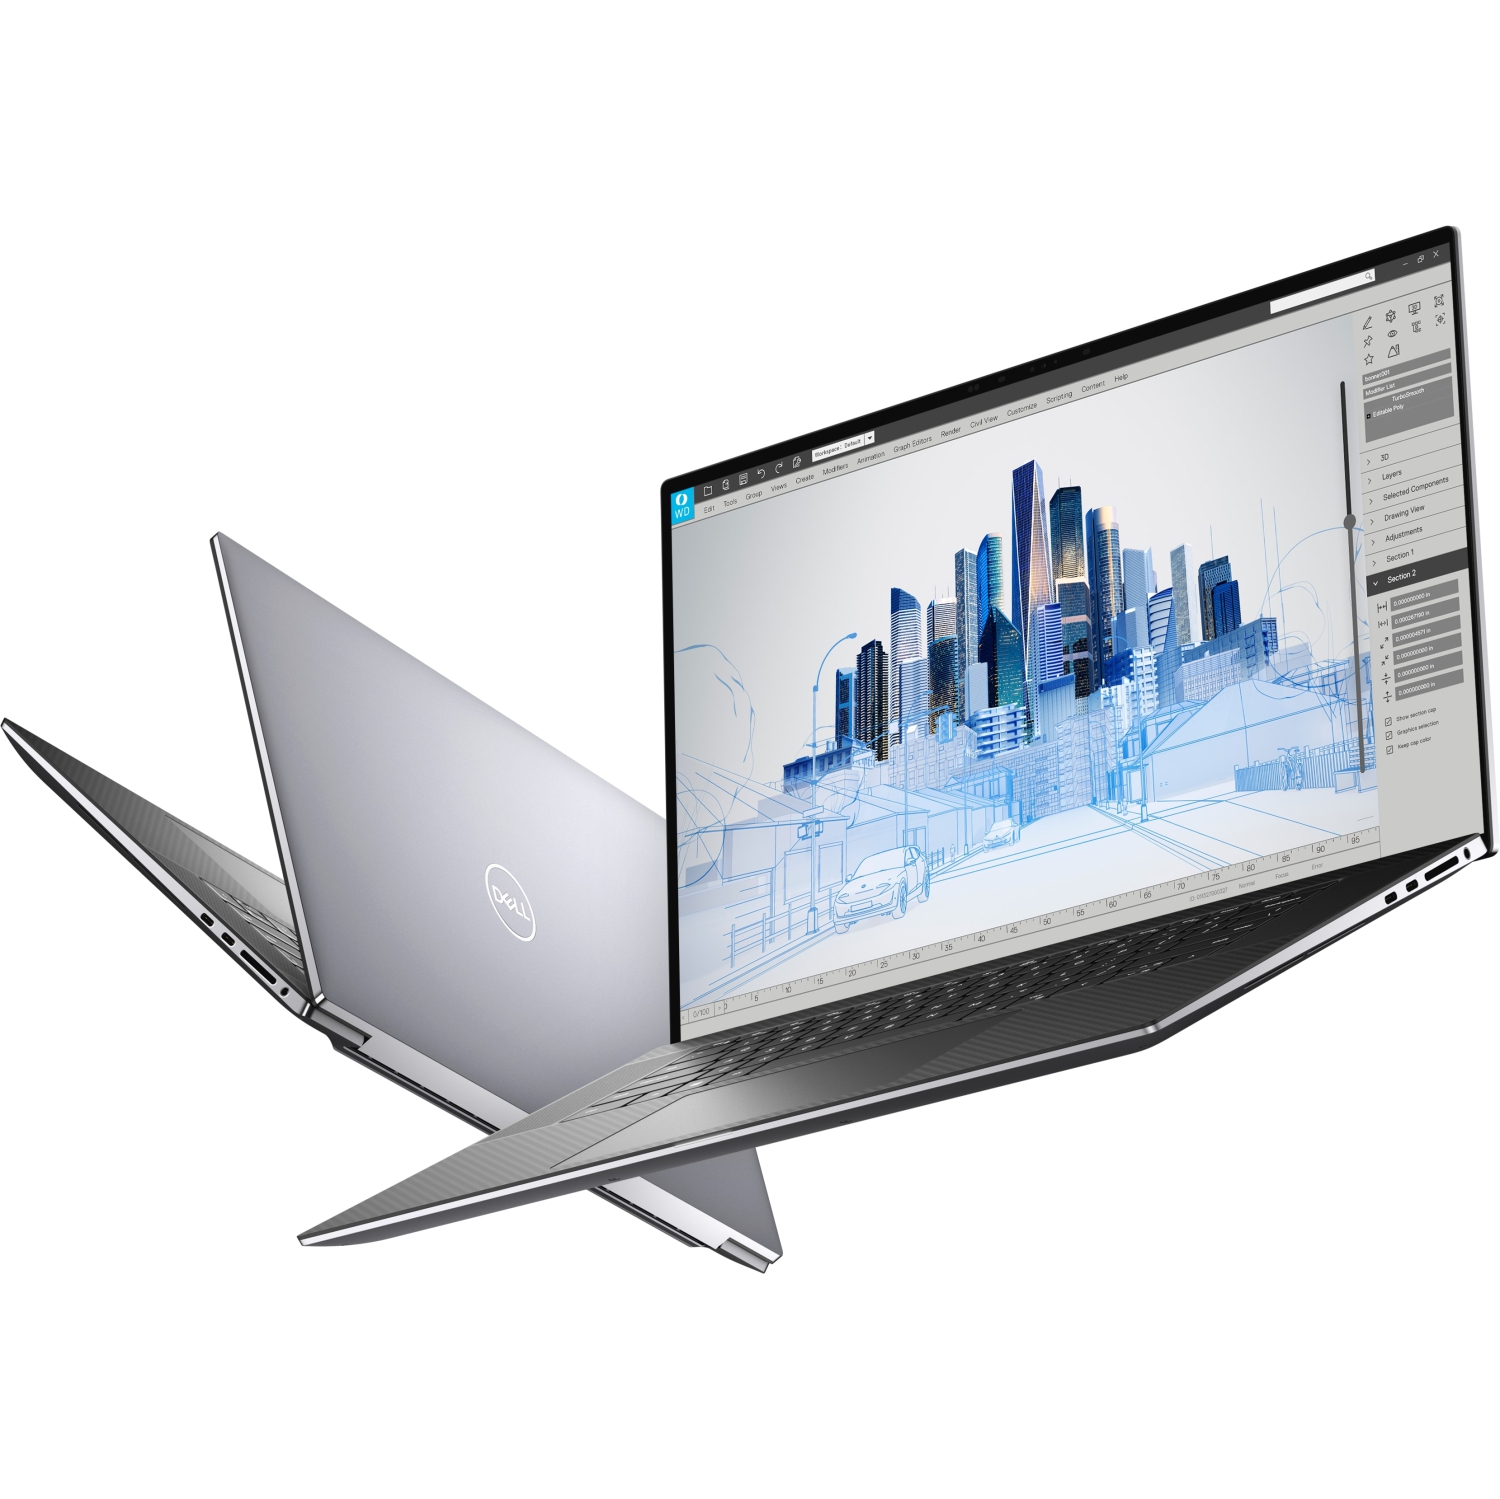 Refurbished (Excellent) - Dell Precision 5000 5760 Workstation Laptop (2021), 17" FHD+, Core i7, 1TB SSD, 16GB RAM, RTX A2000, 4.8 GHz, 11th Gen CPU Certified Refurbished